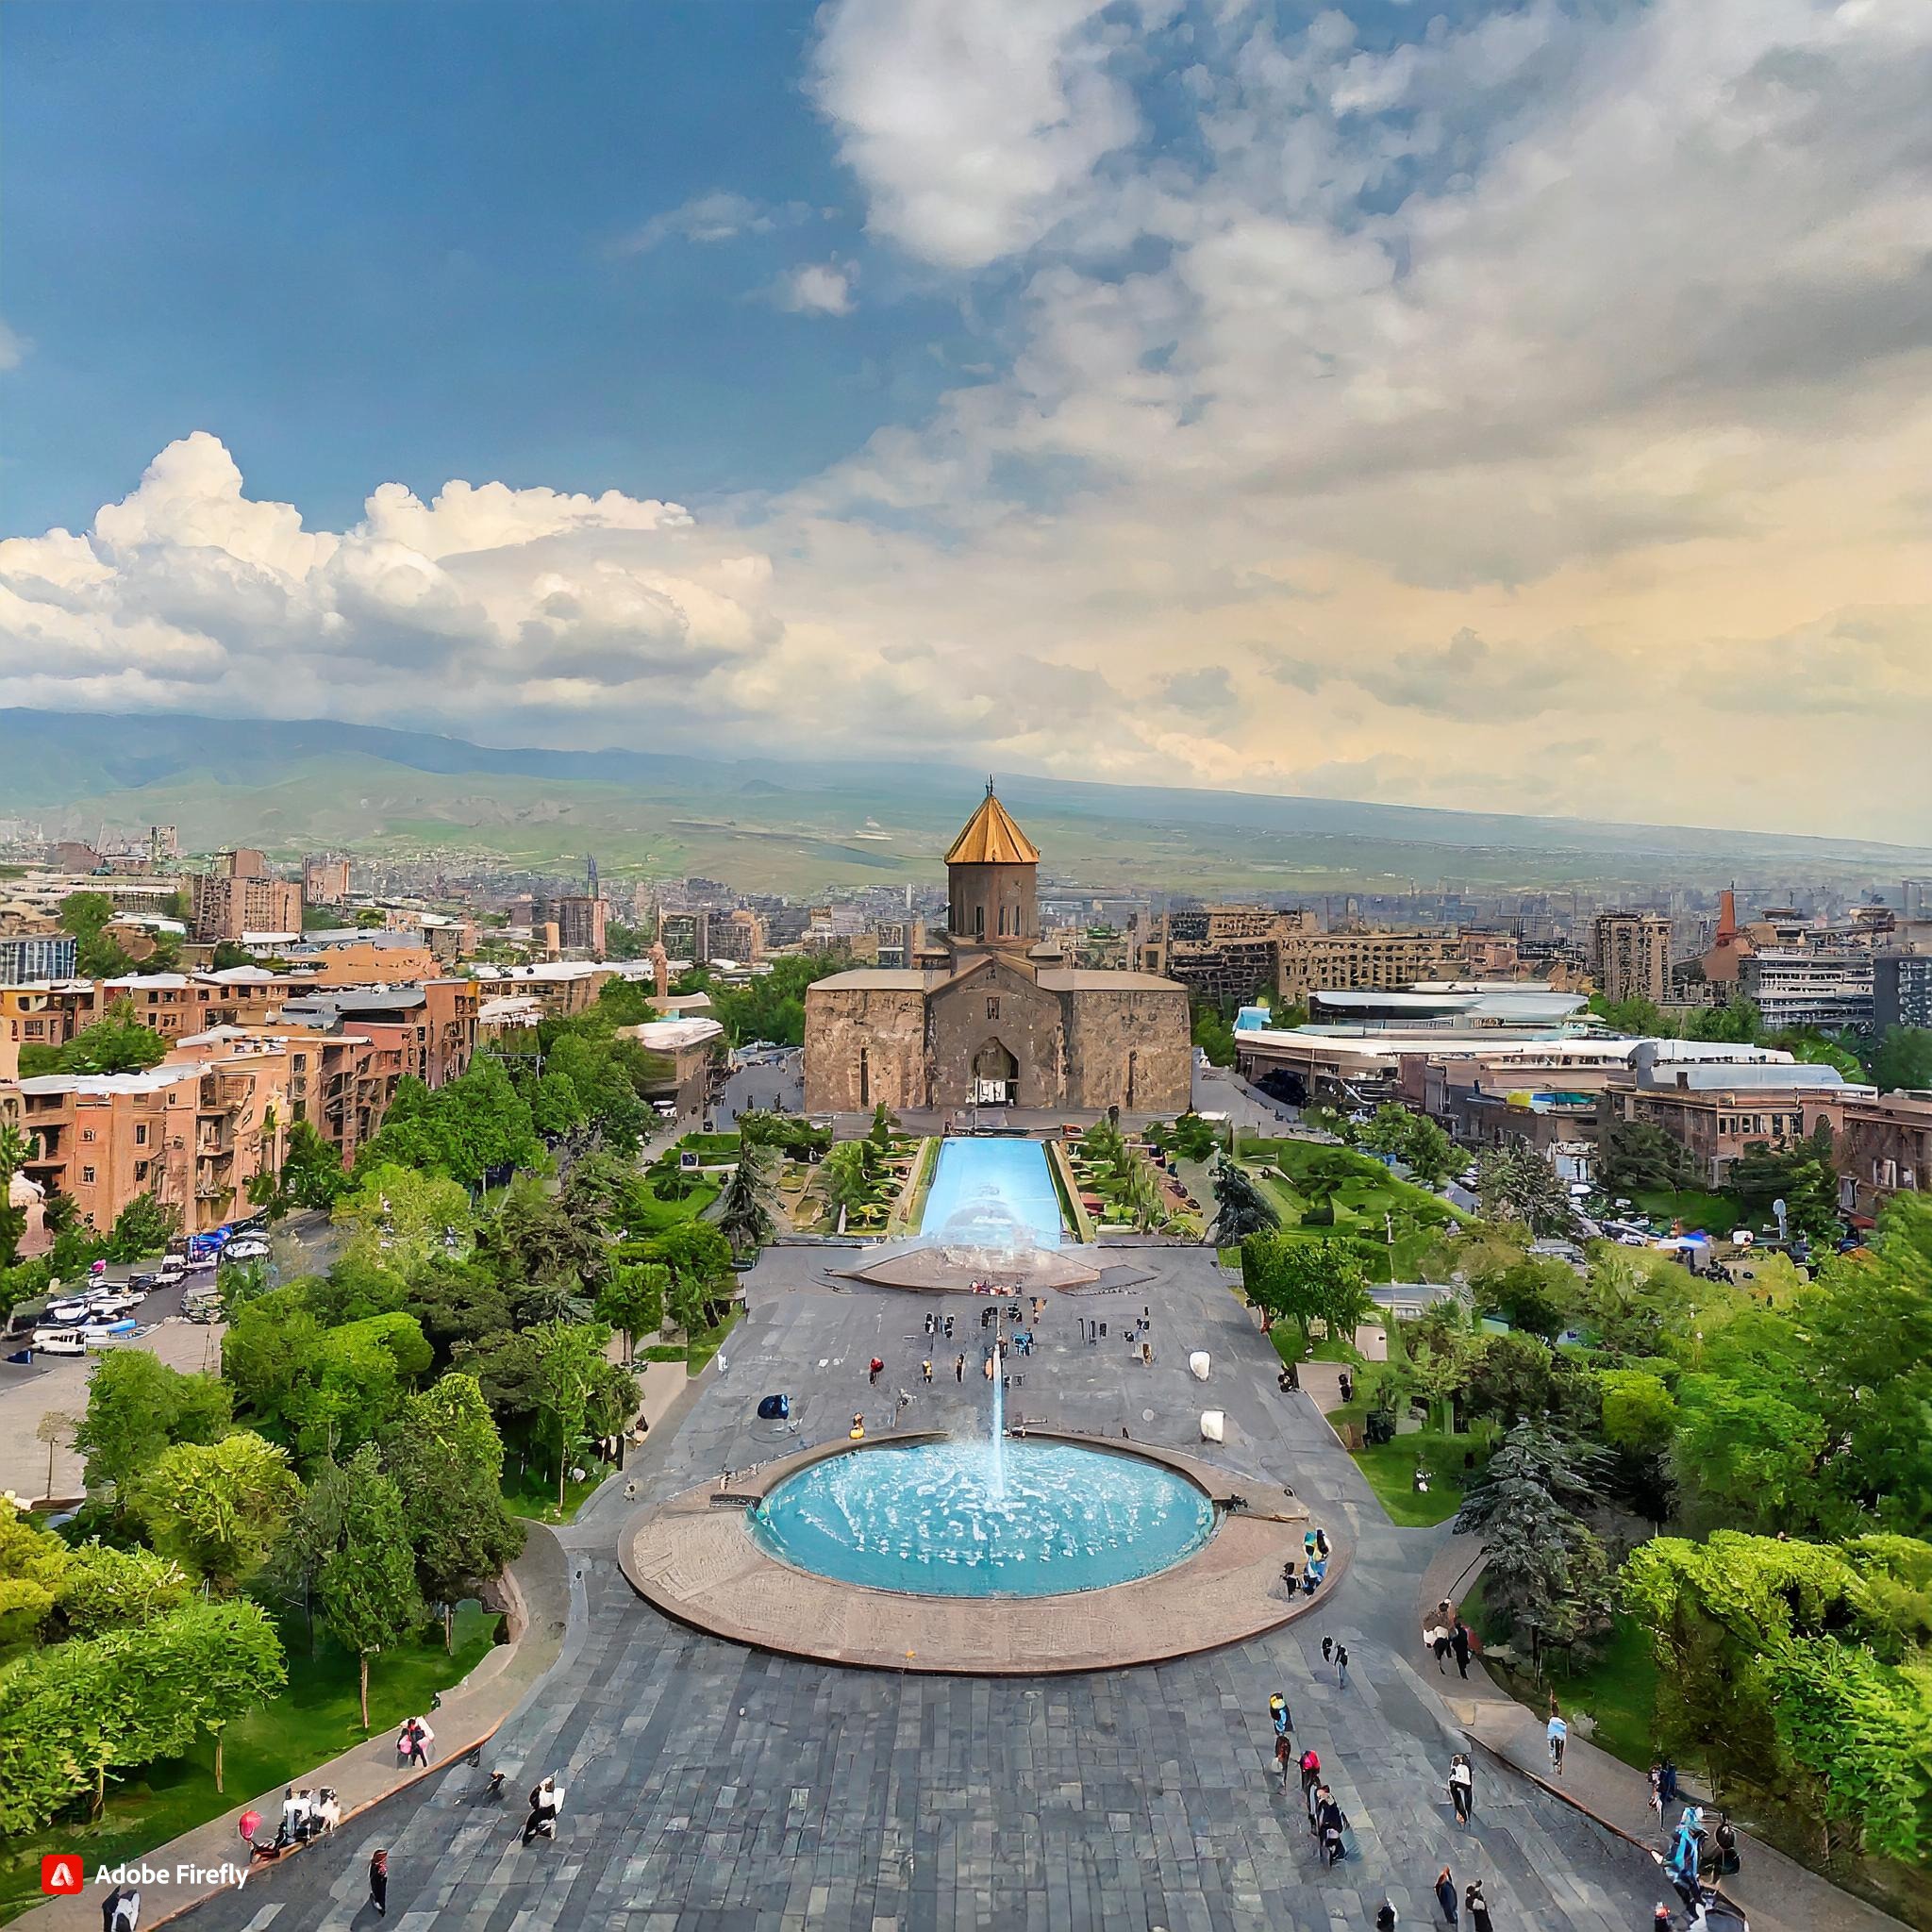 Firefly generate an image capturing the beauty of the city yerevan there's a lot of people walking d.jpg